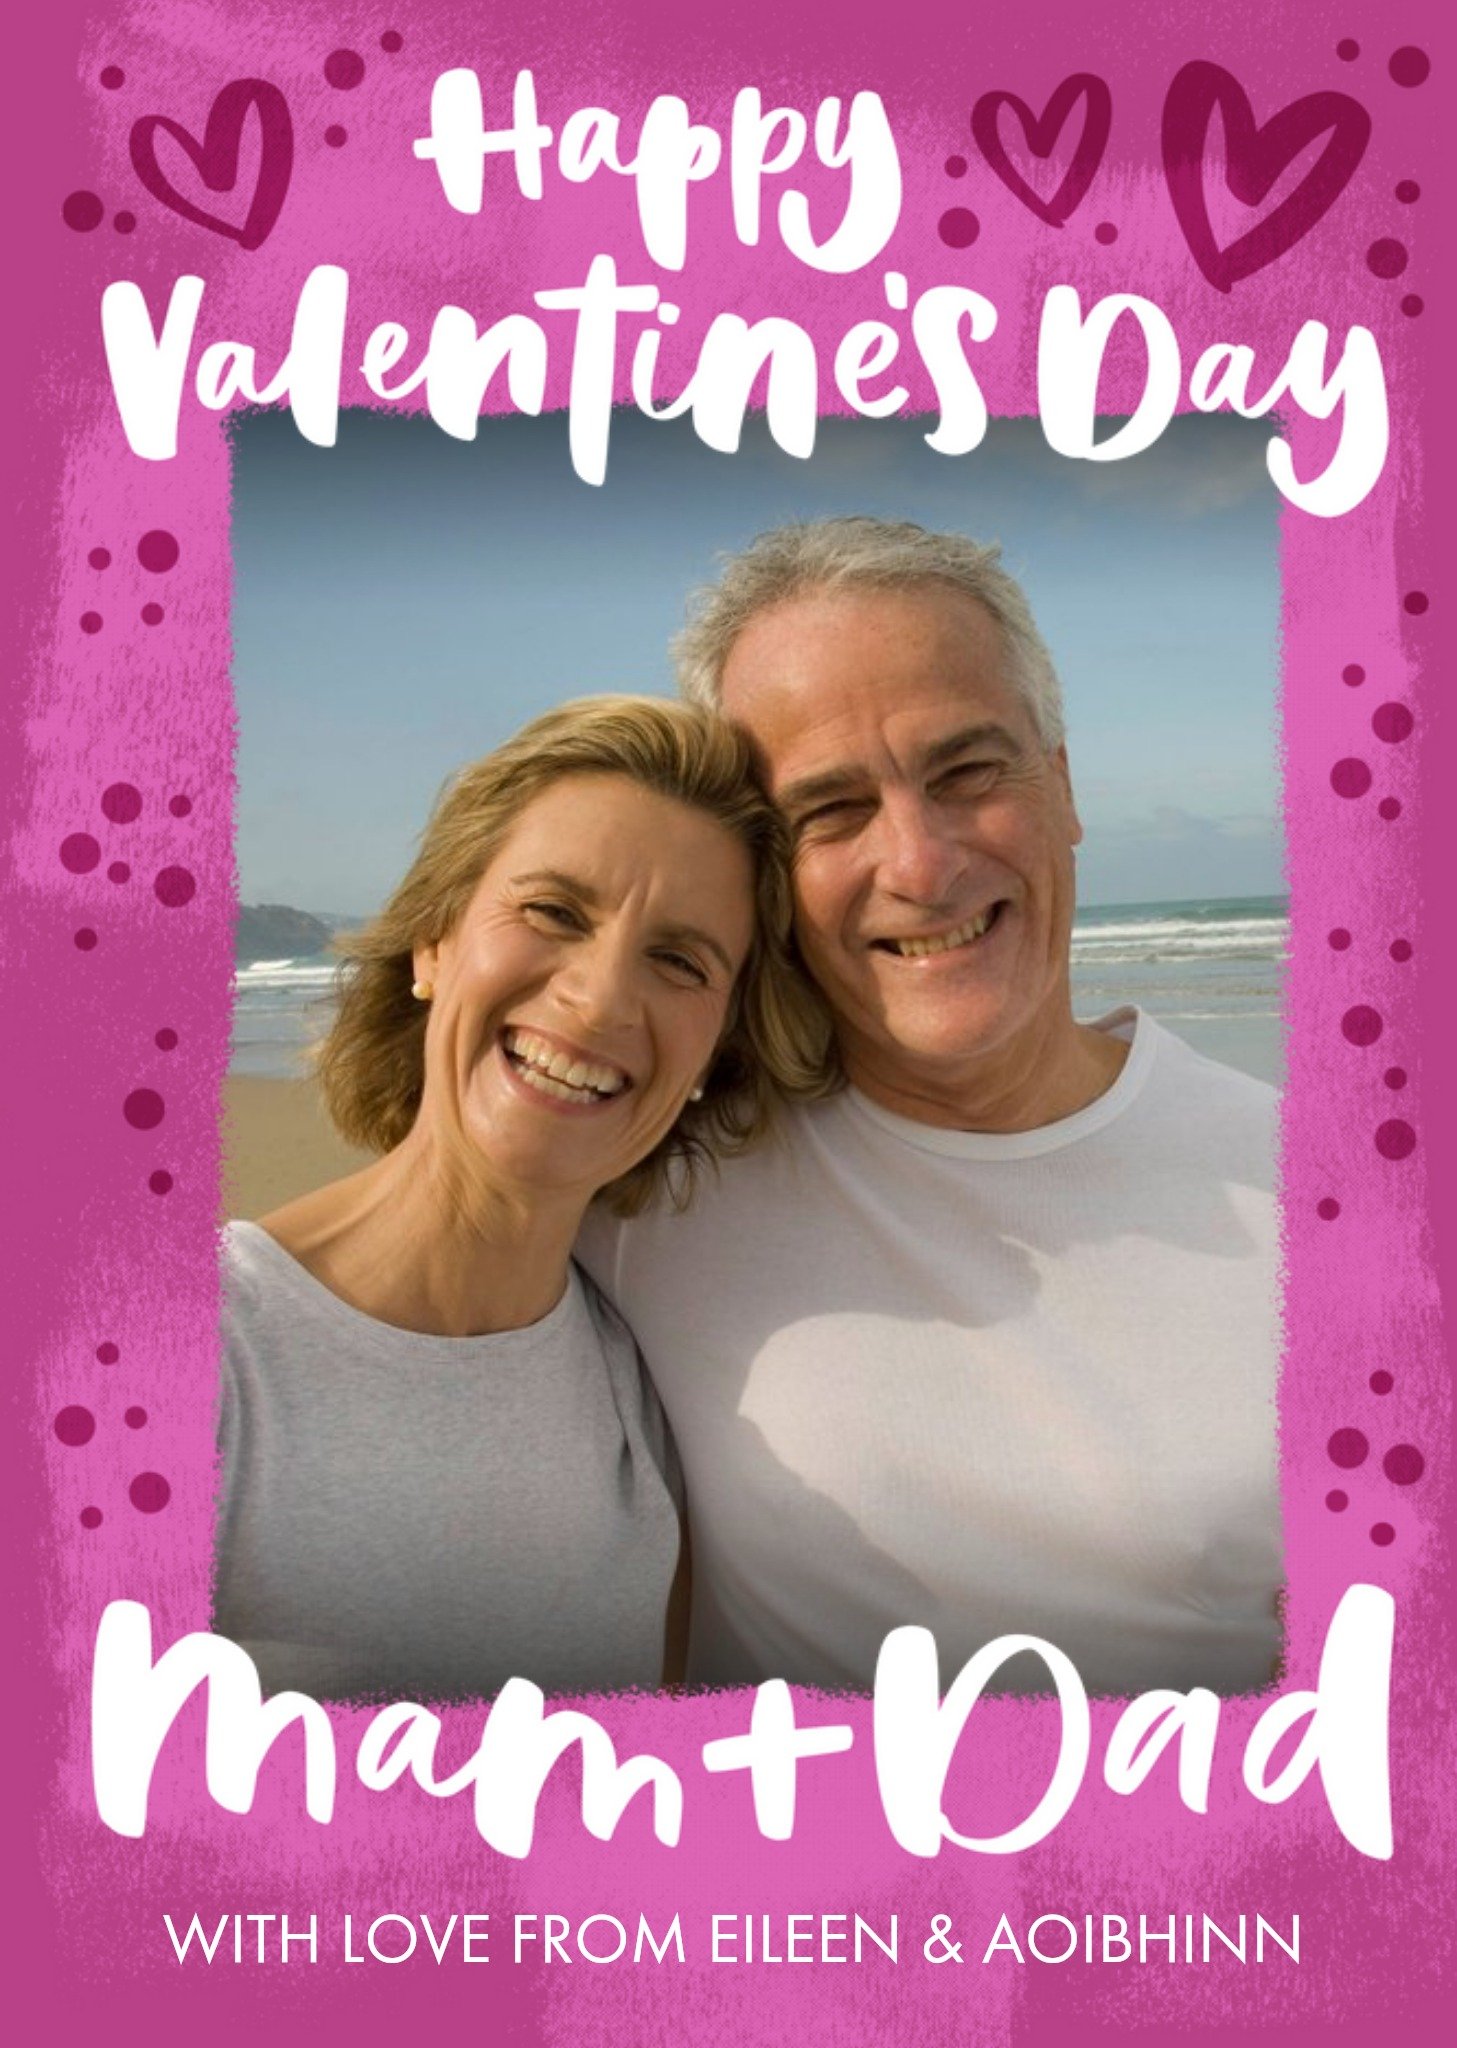 Moonpig Handwritten Typography On A Pink Background With Hearts Mum And Dad Valentine's Photo Upload